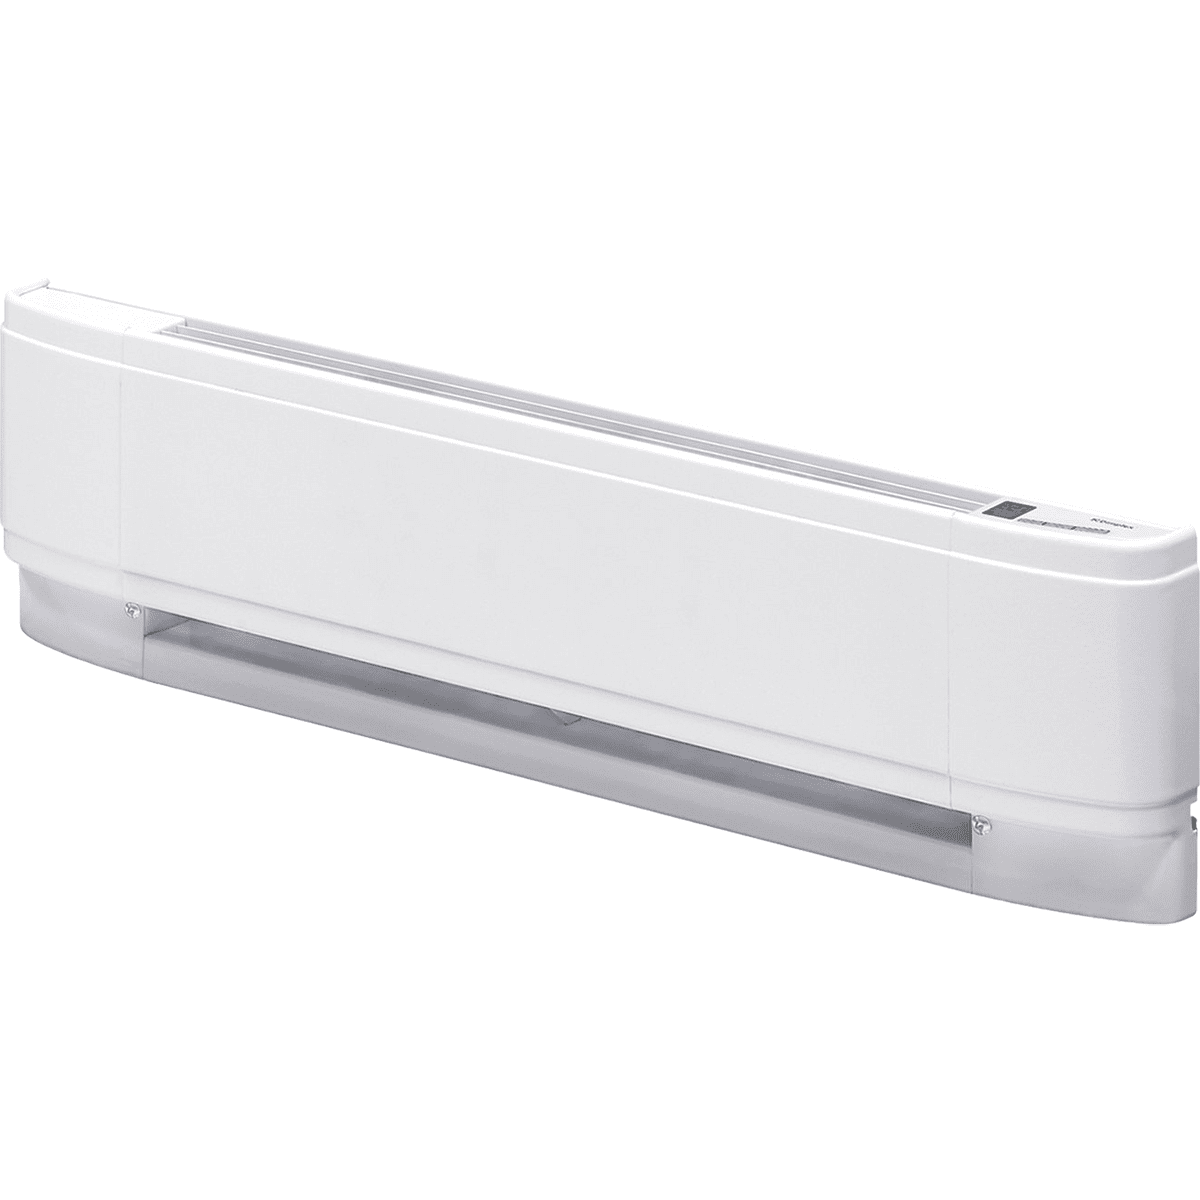 Dimplex 240V Connex Proportional Linear Convector Baseboard Heater - 500W